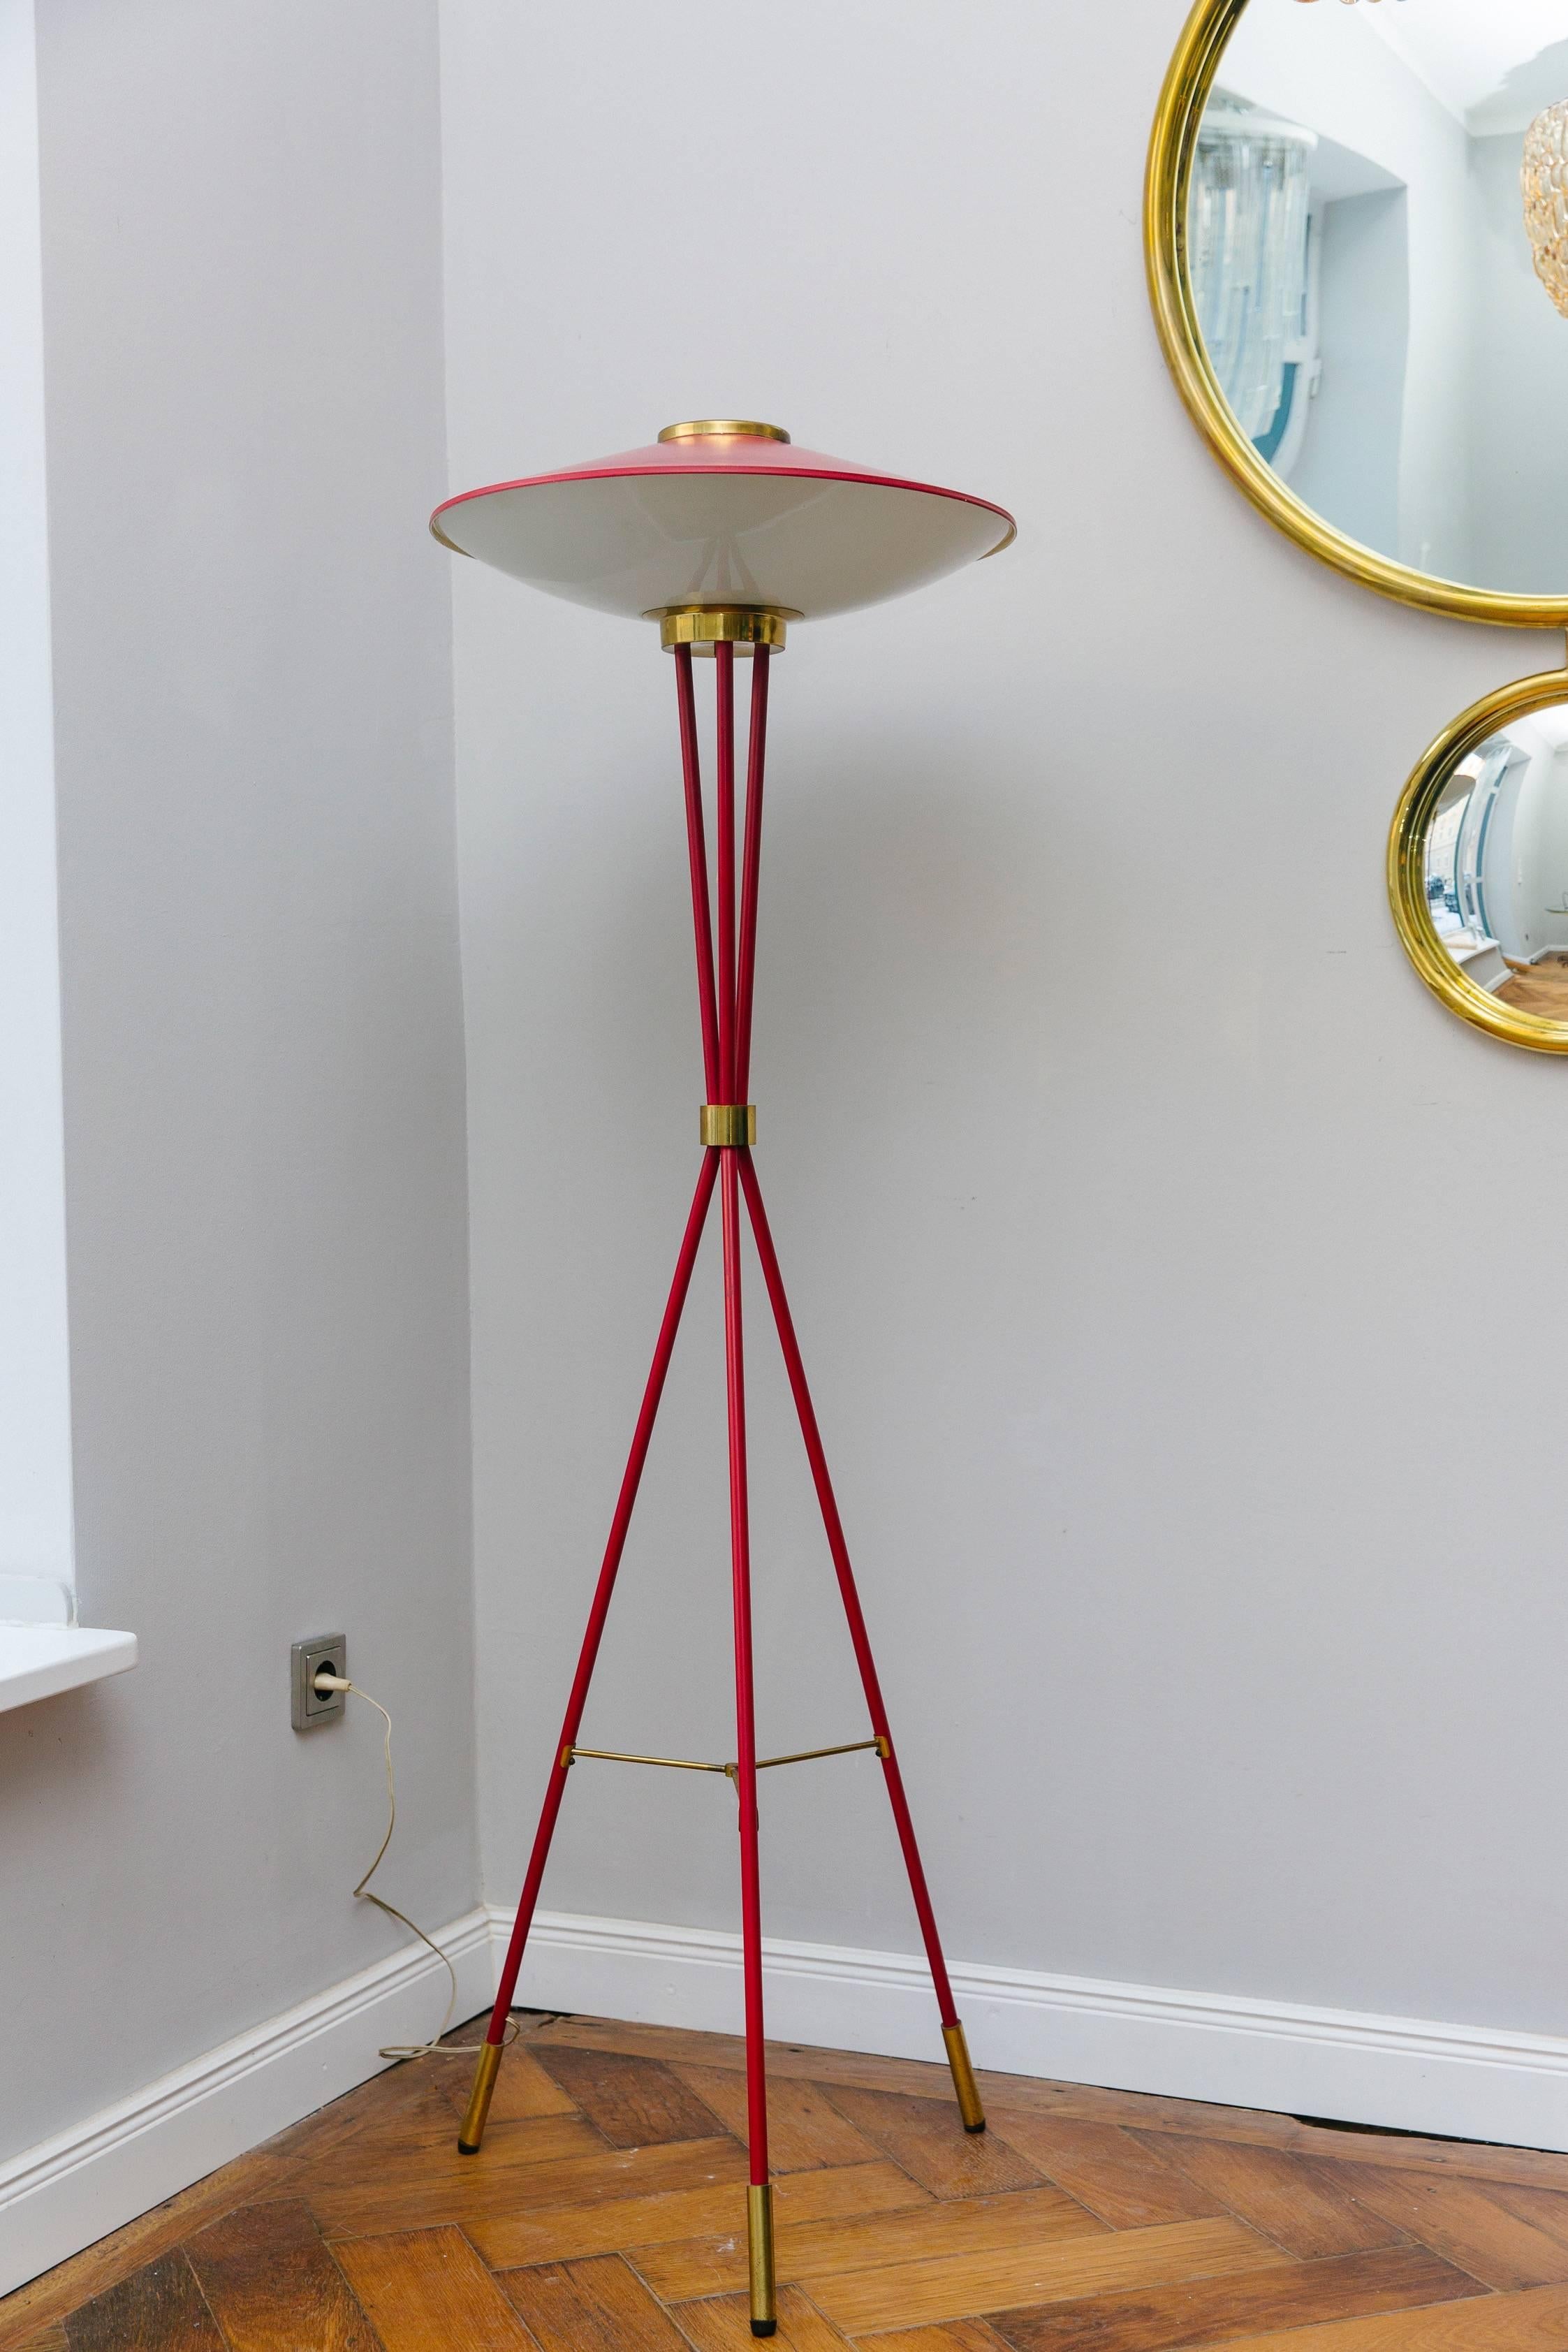 Rare floor lamp by Stilnovo, Italy, circa 1955, red lacquered metal legs, brass legs, brass elements, red lacquered metal shade and white opaline glass shade, original lacquered. Very good vintage condition, inside three bulbs, rewired.
Measures: